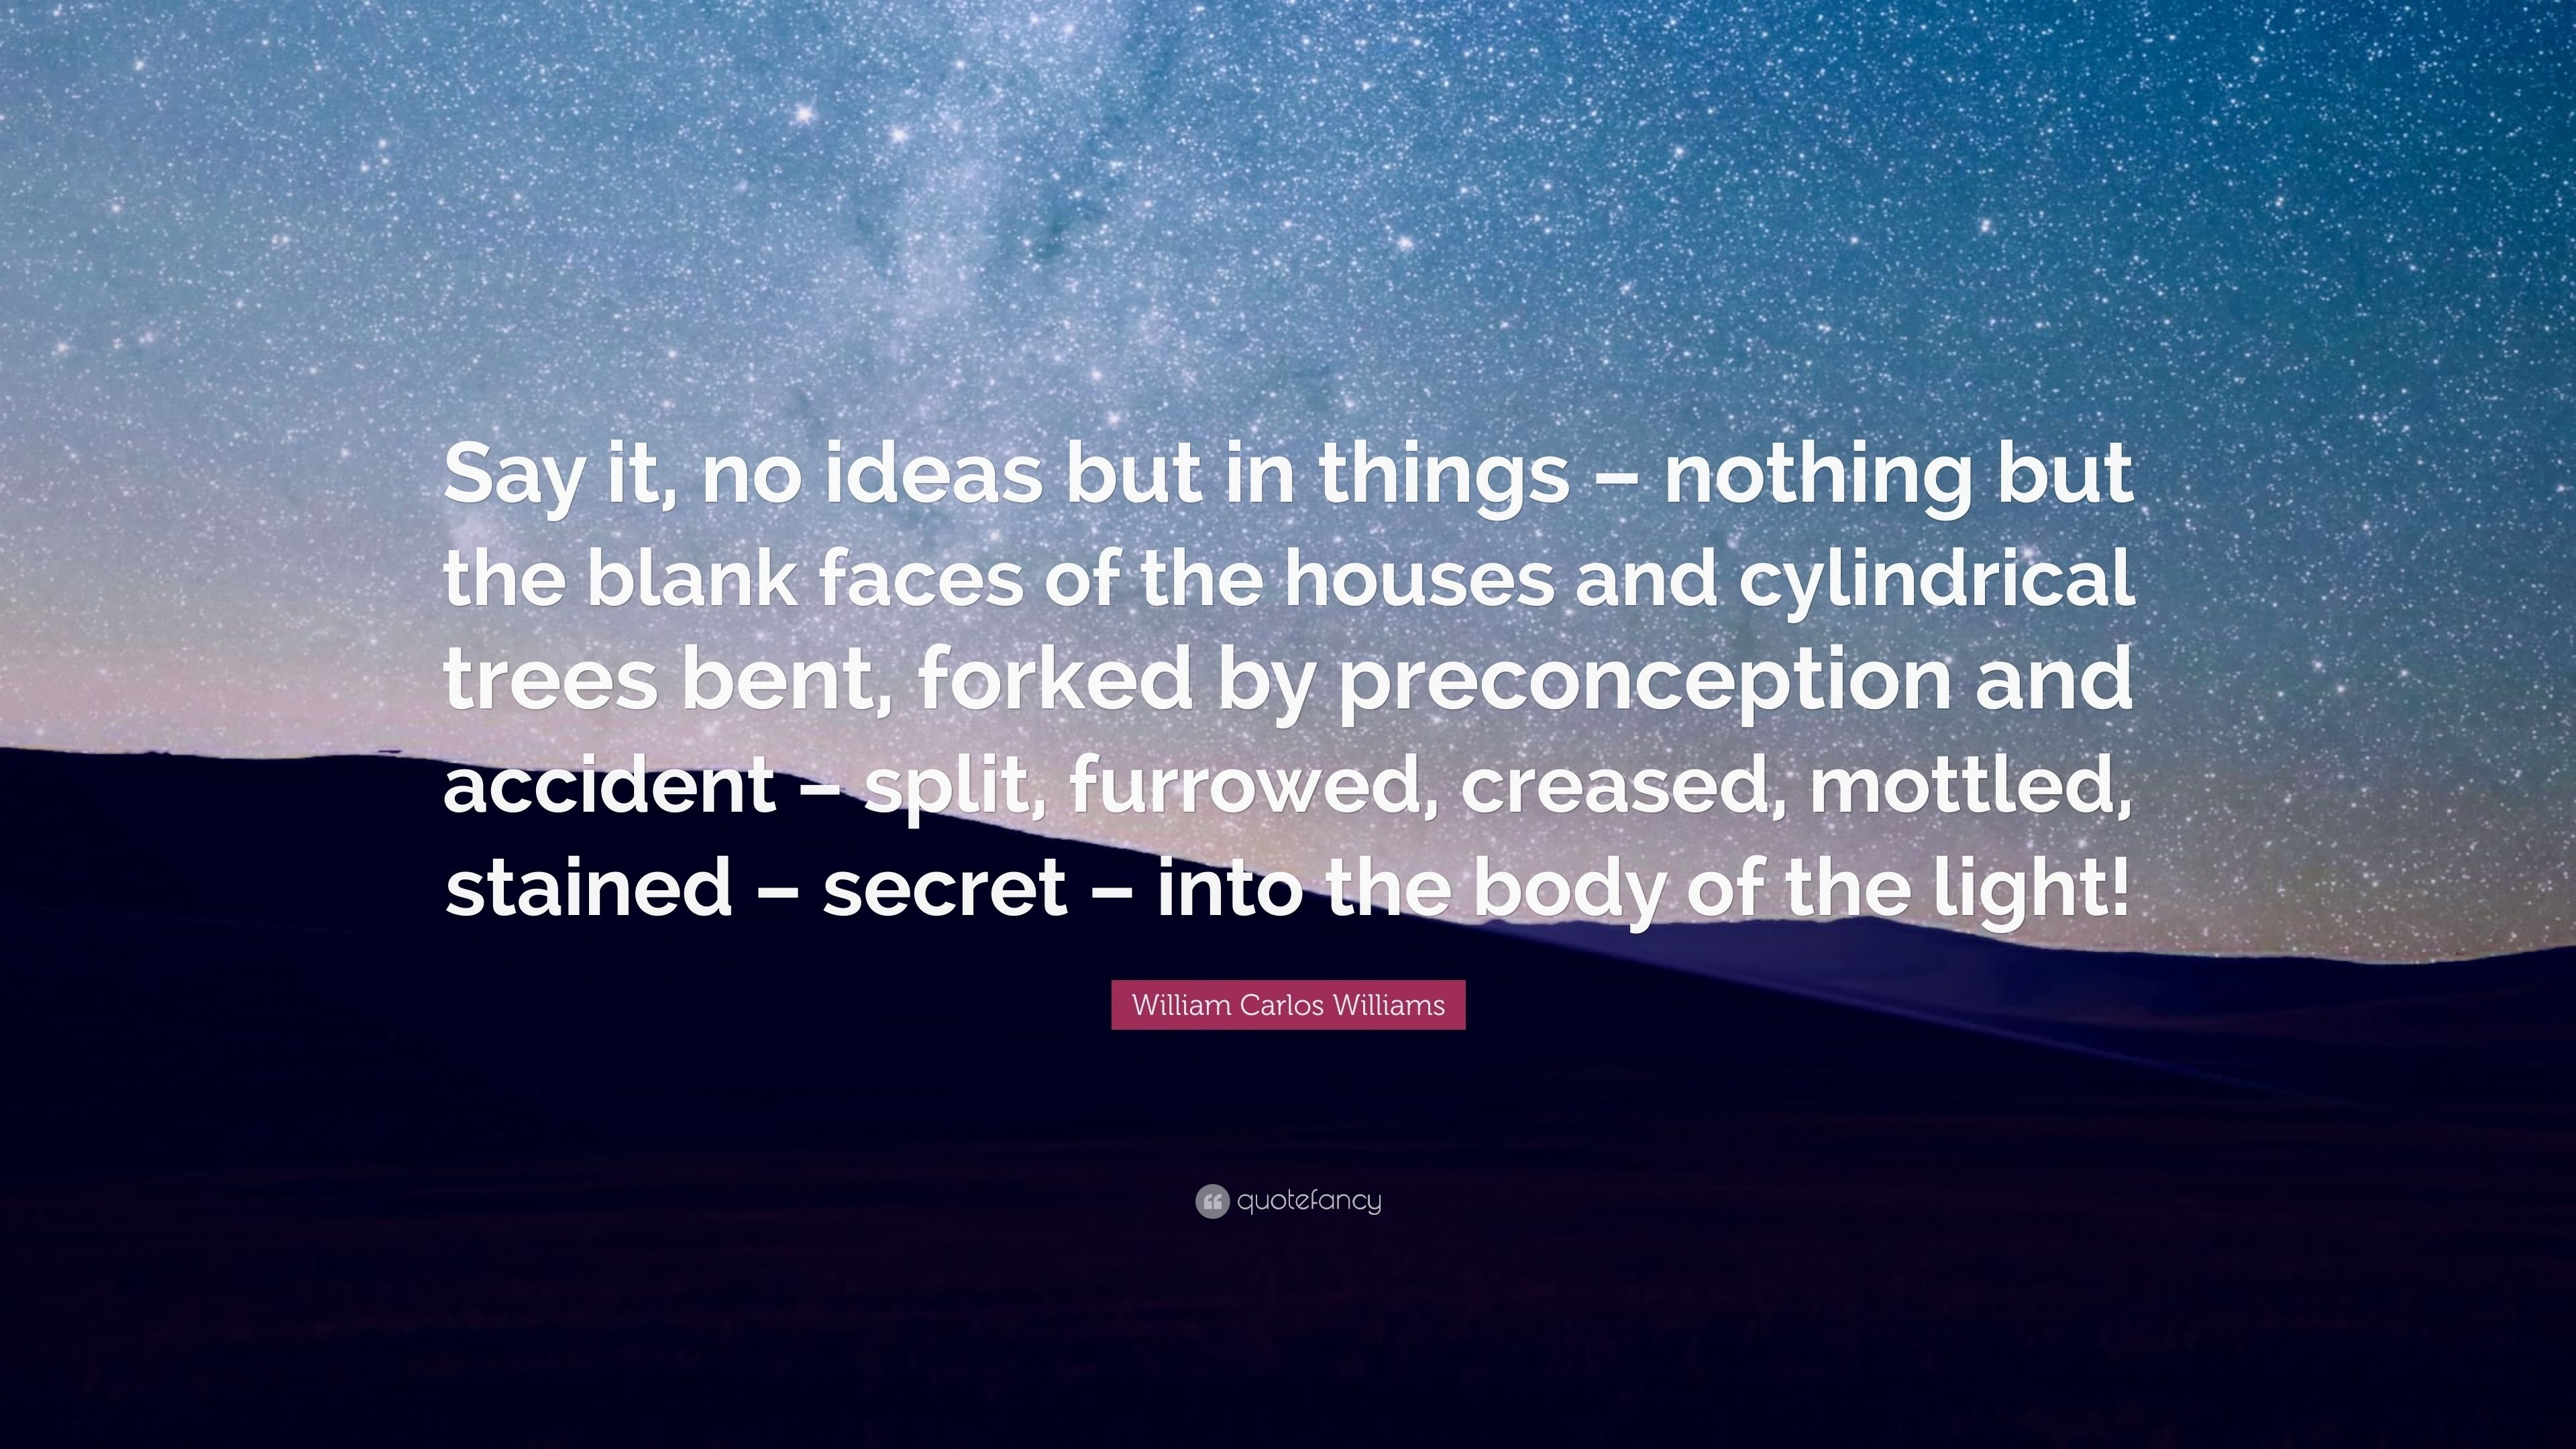 10 Fabulous No Ideas But In Things william carlos williams quote say it no ideas but in things 4 2022